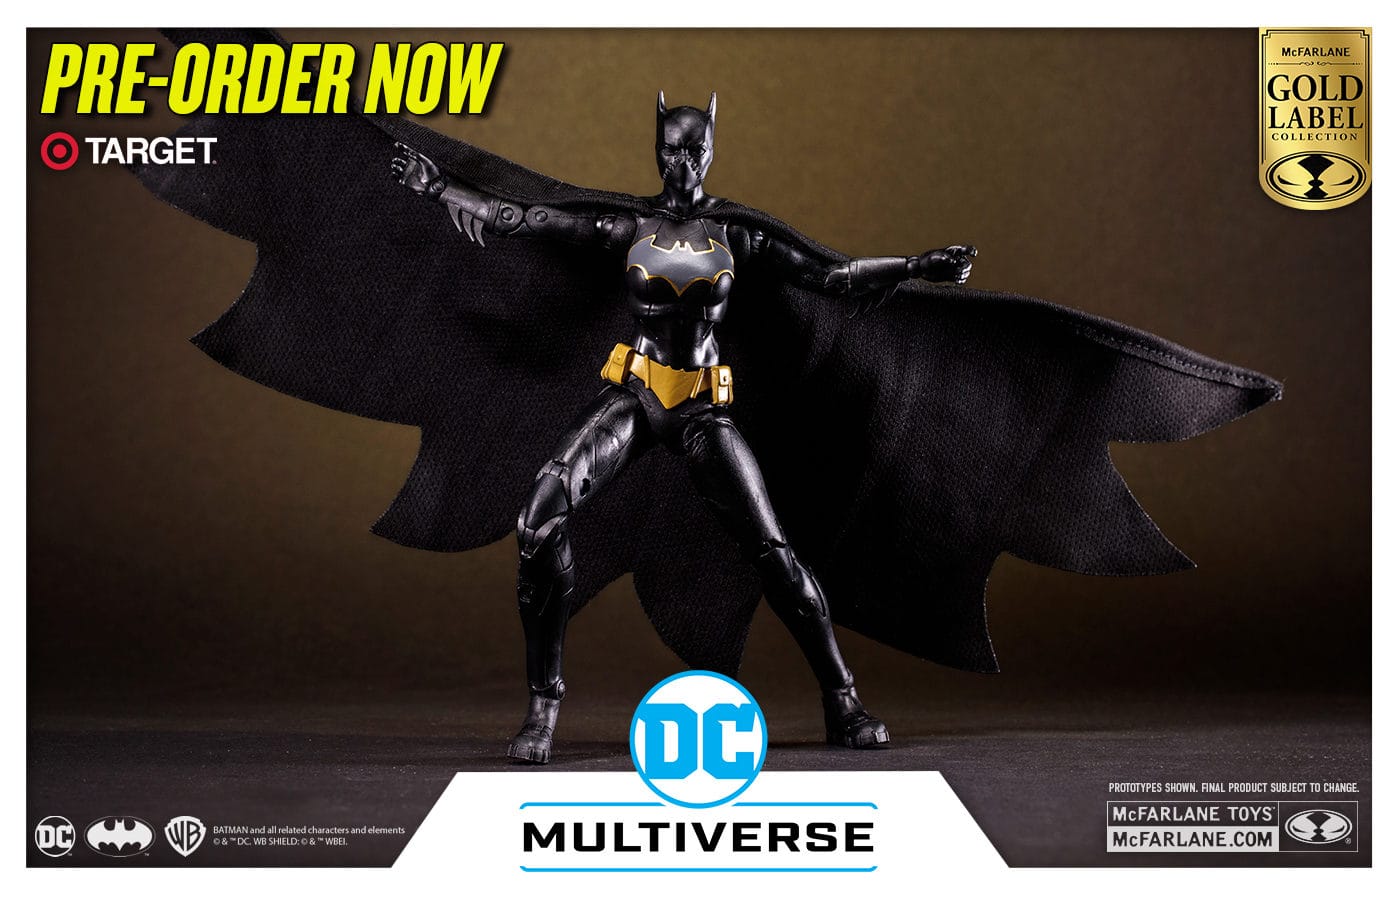 McFarlane Toys celebrates 30 years with limited edition Gold Label figures